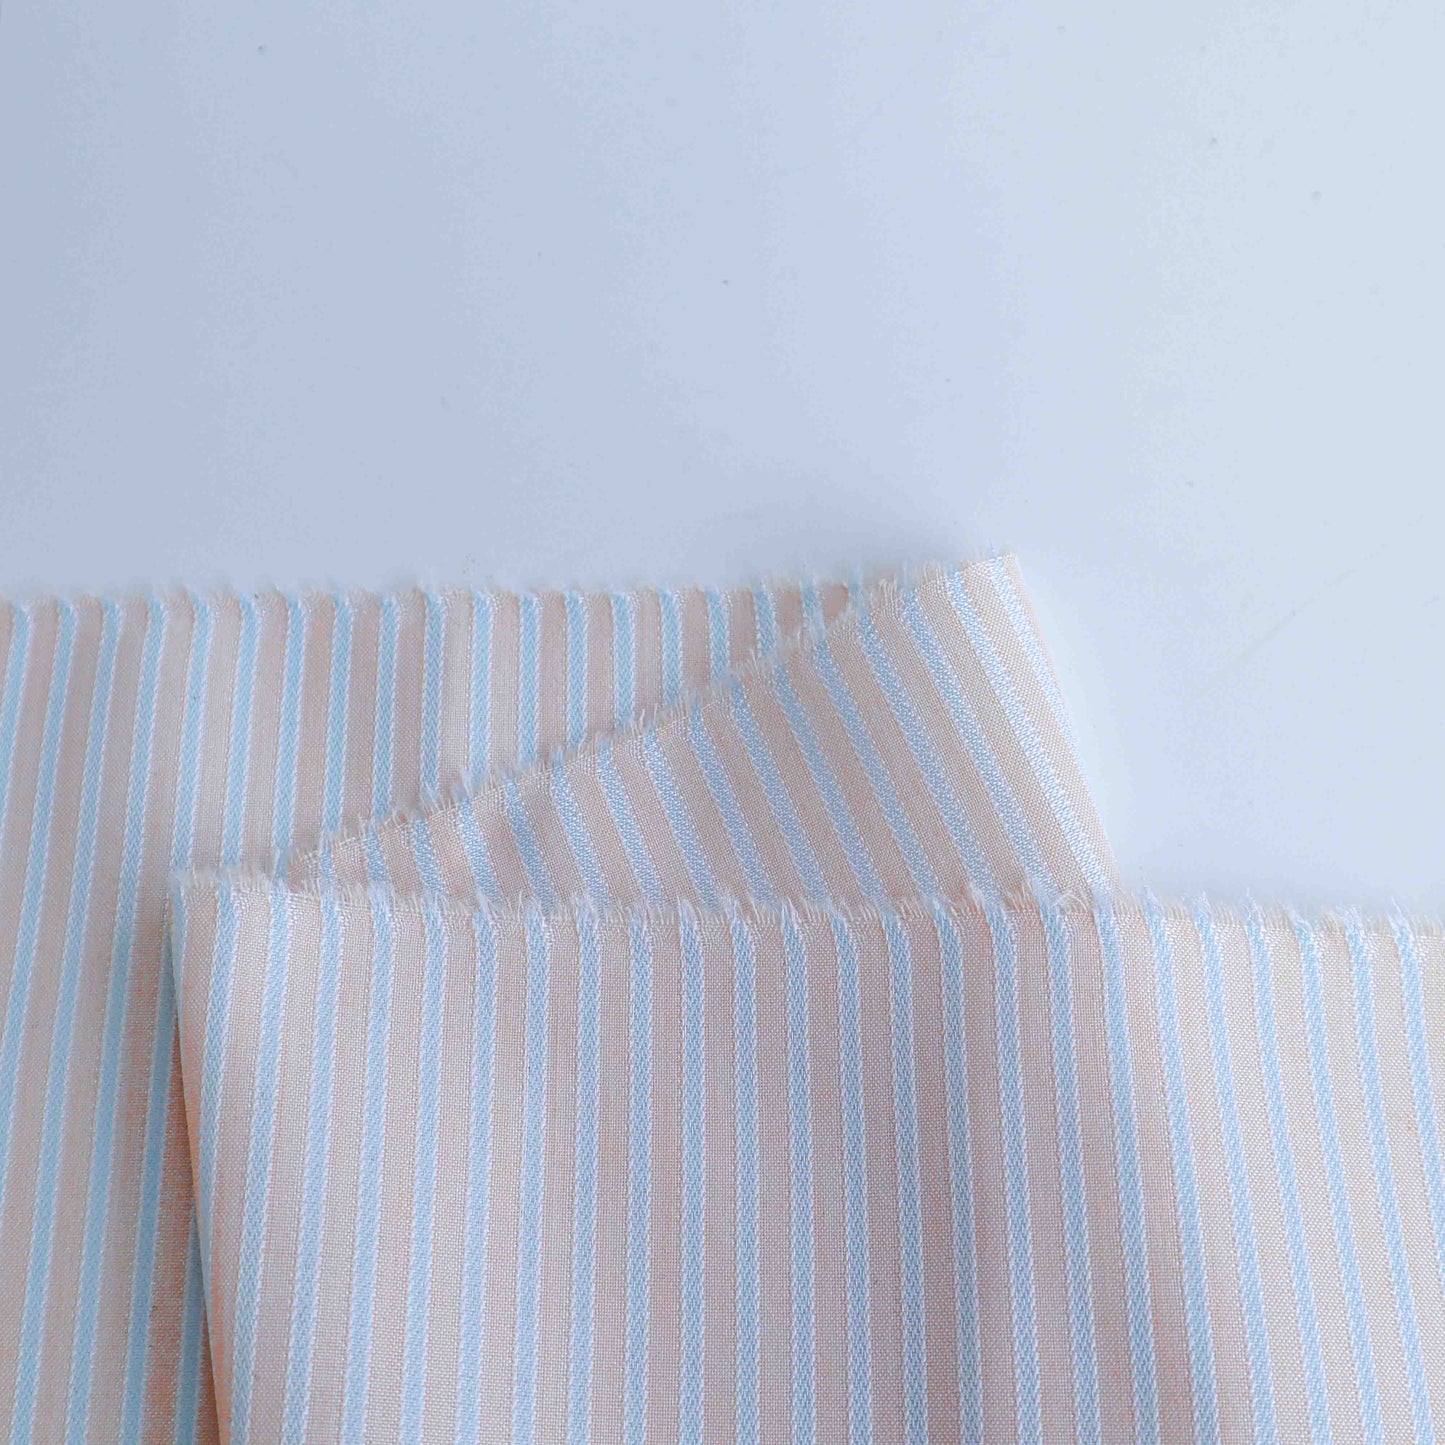 Lightweight stripes fabric in pink beige colour. This is poly-rayon blend fabric is soft to touch. The polyester blended composition adds extra durability.